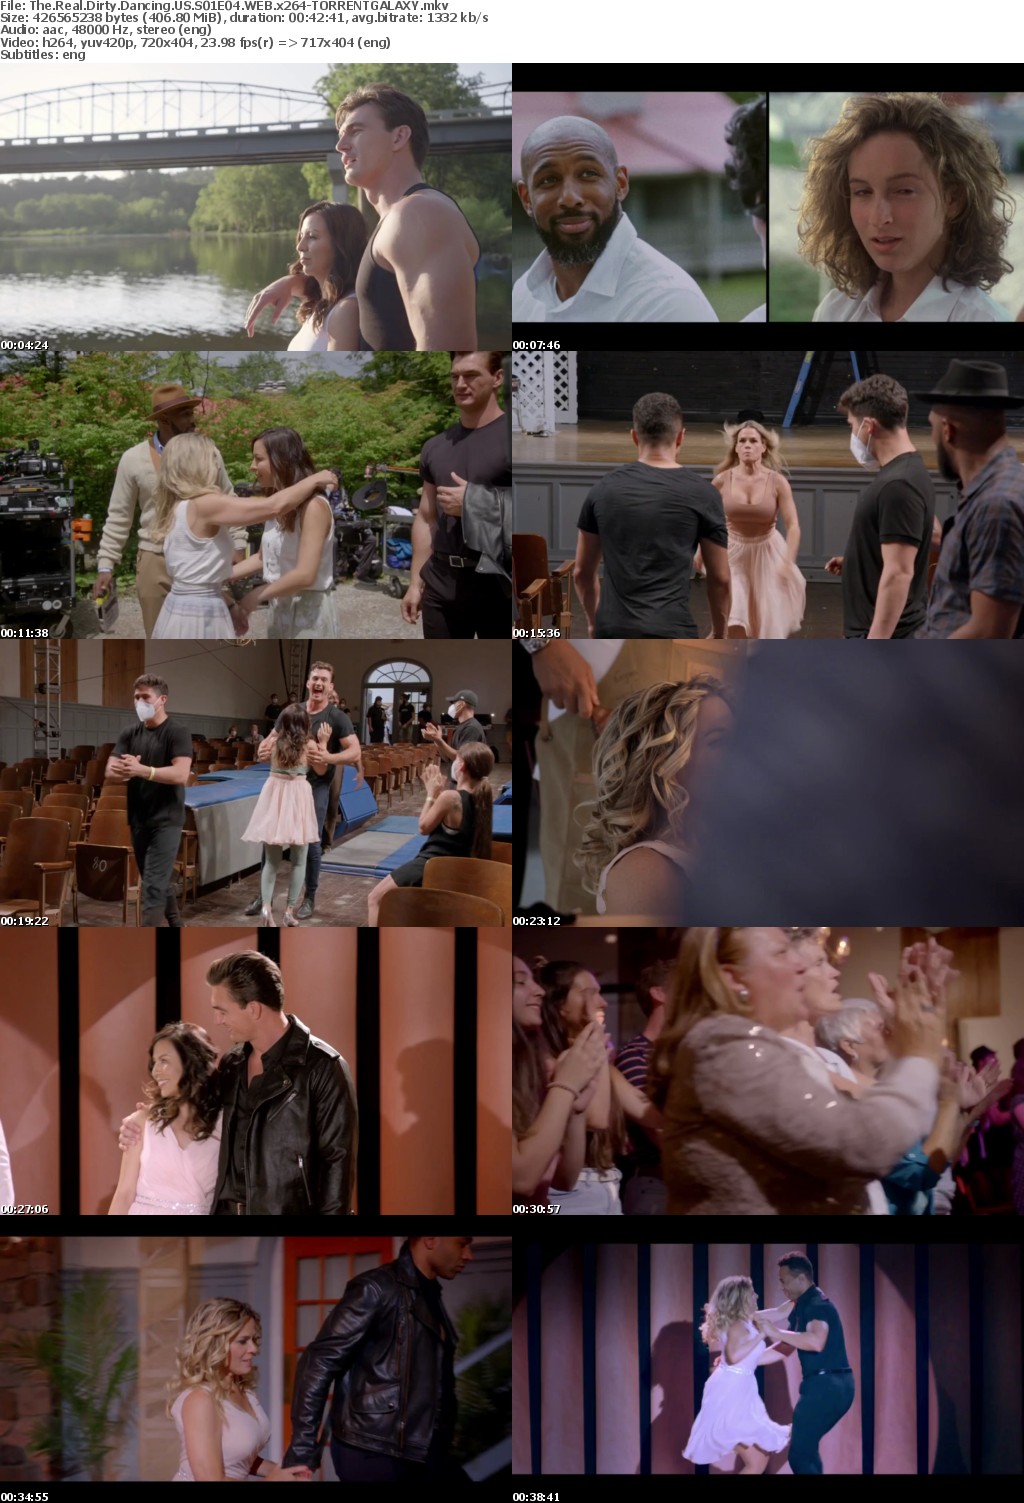 The Real Dirty Dancing US S01E04 WEB x264-GALAXY